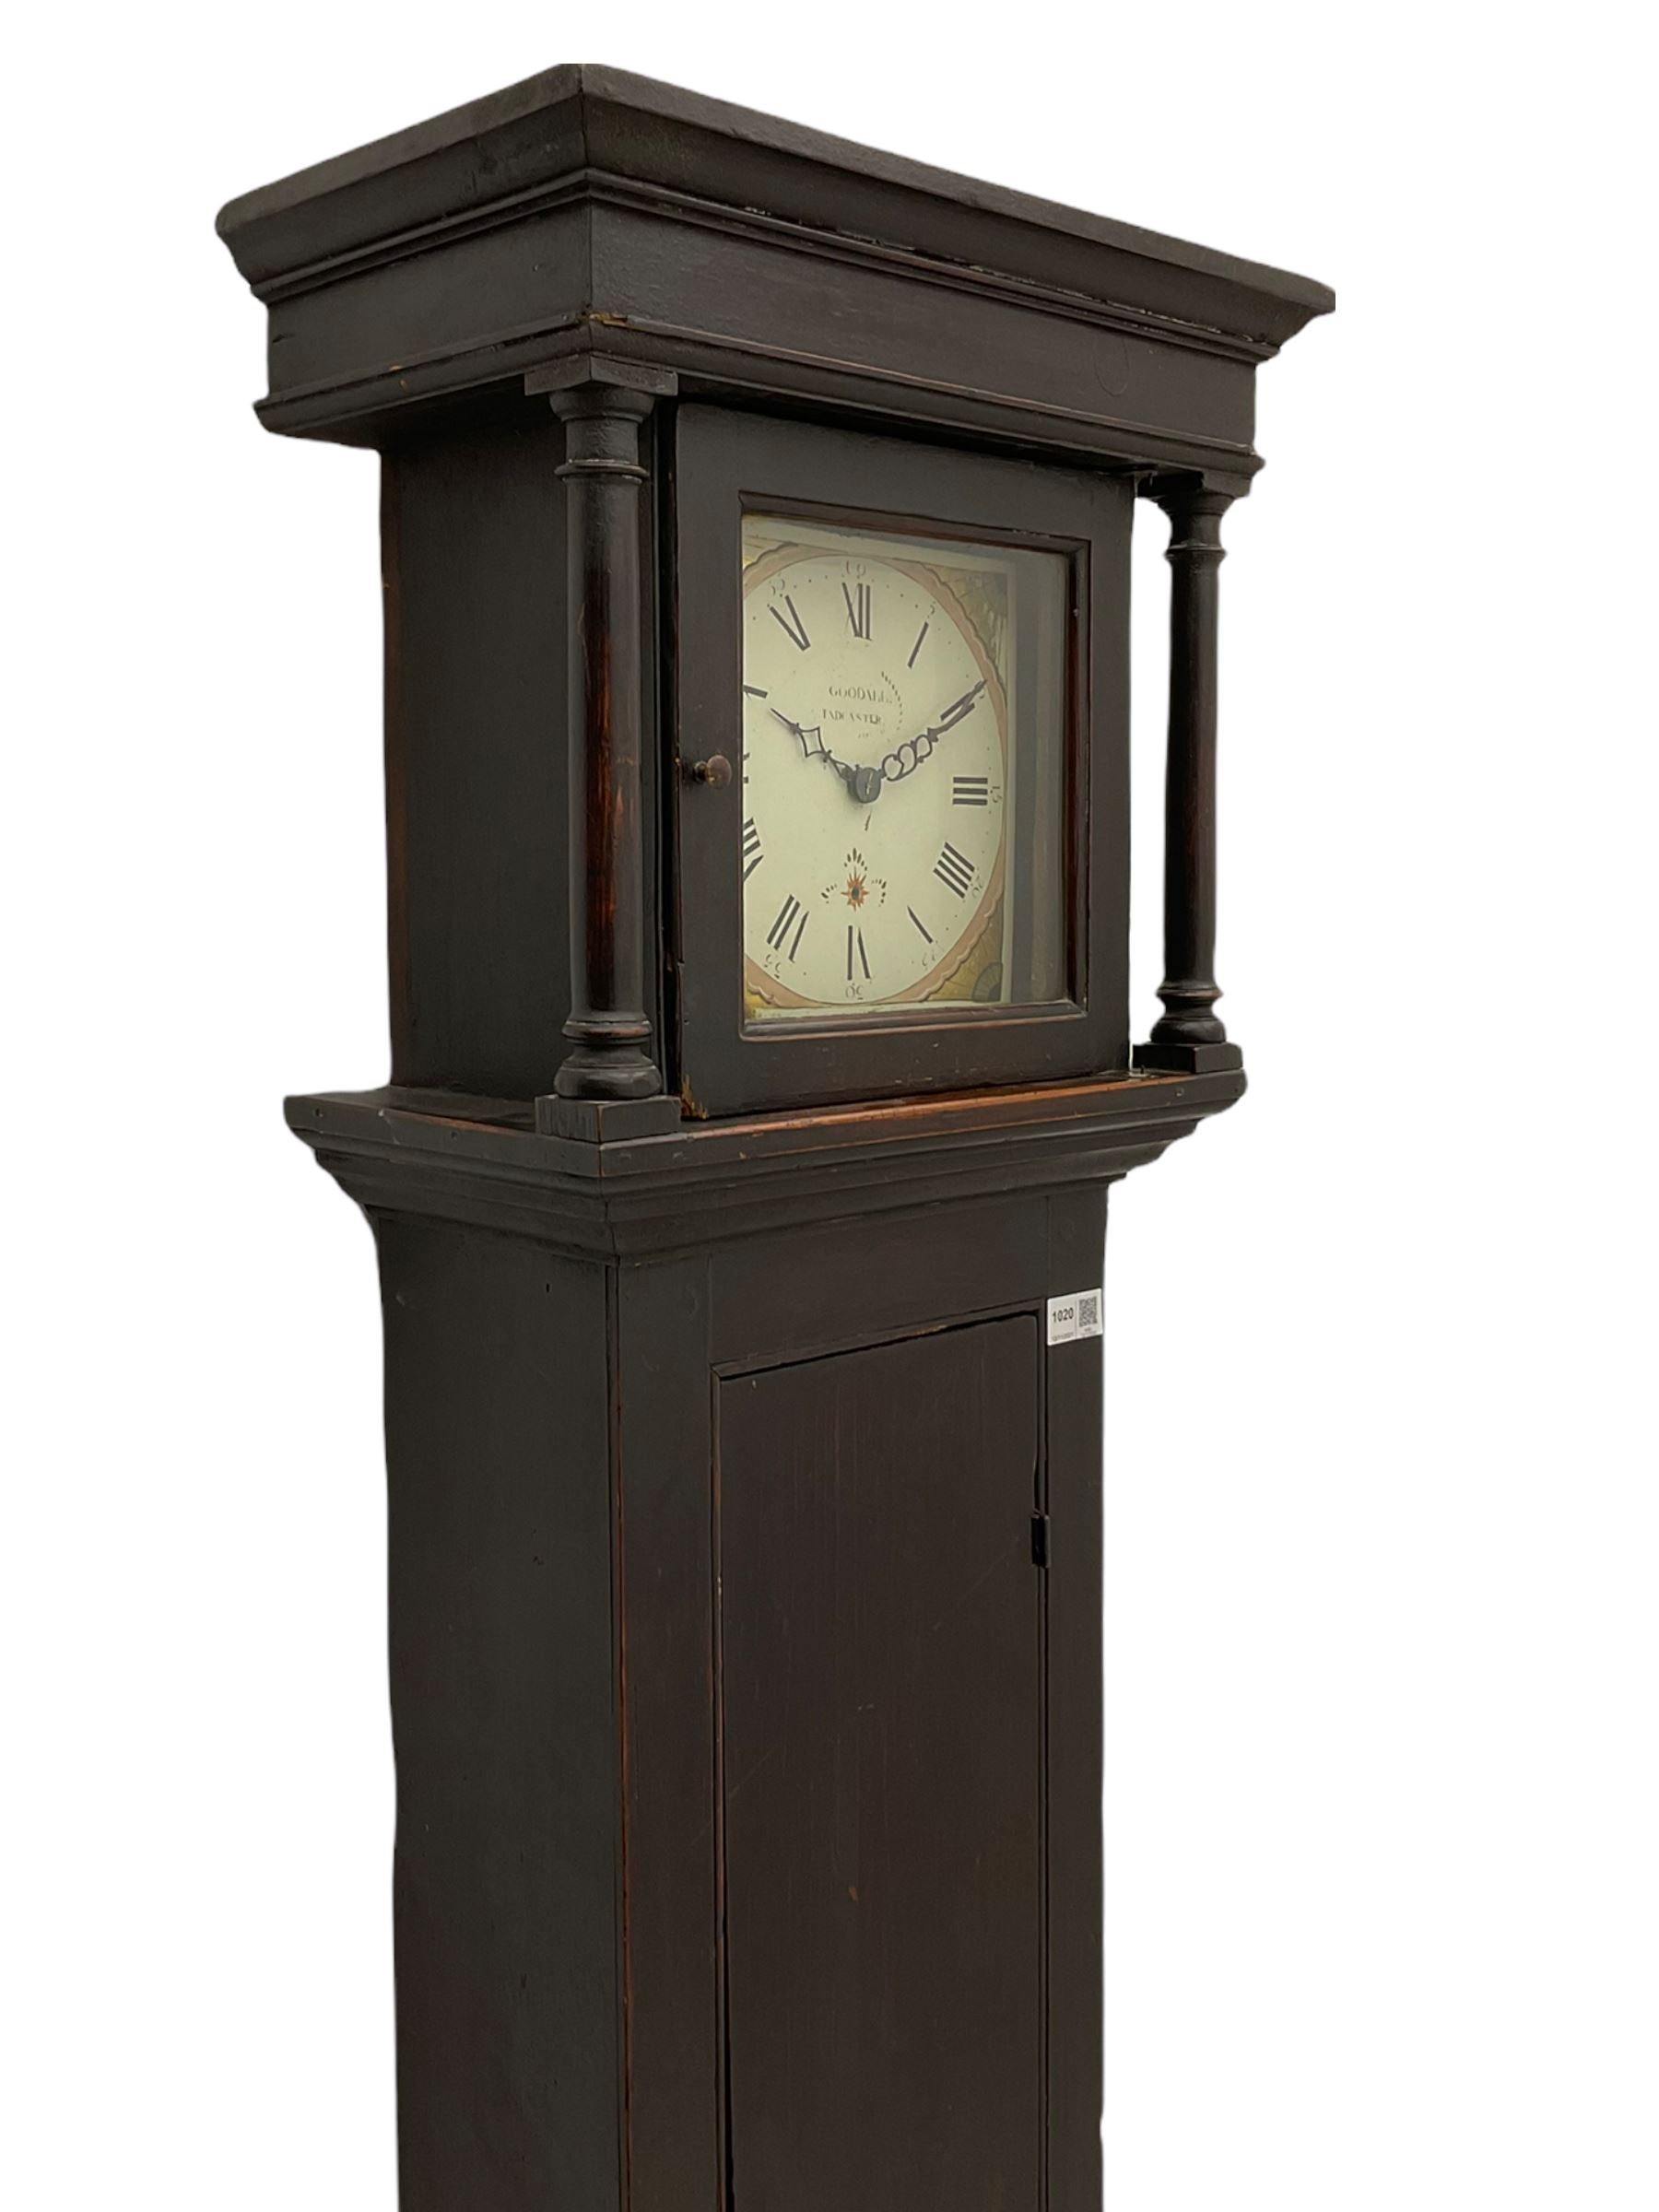 A provincial 30-hour chain driven longcase clock in an oak finished case with a flat top and wide co - Image 7 of 7